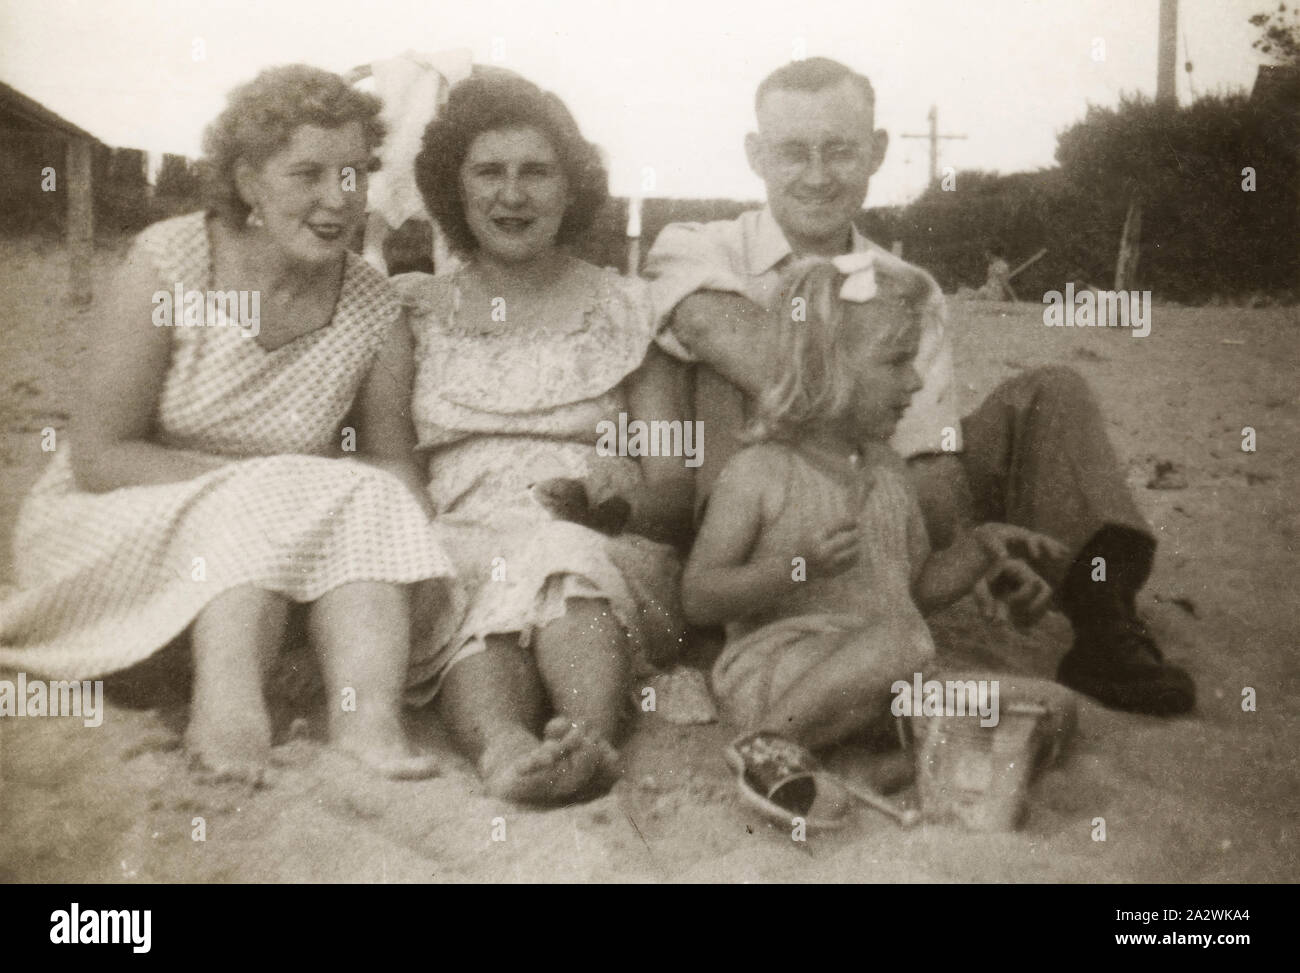 Photograph - Leech Family at Beach, Melbourne, circa 1954, Photograph of Eileen Leech (centre) with Aunt Flo and Uncle Laurence and her daughter Susan at the beach, possibly in Frankston, Melbourne, circa 1954. Eileen, James and Susan Leech had migrated to Melbourne from England in 1953 and they returned to England in 1956. James and Eileen Leech and their two and a half year old daughter Susan migrated from Manchester, England in November 1953 under Stock Photo